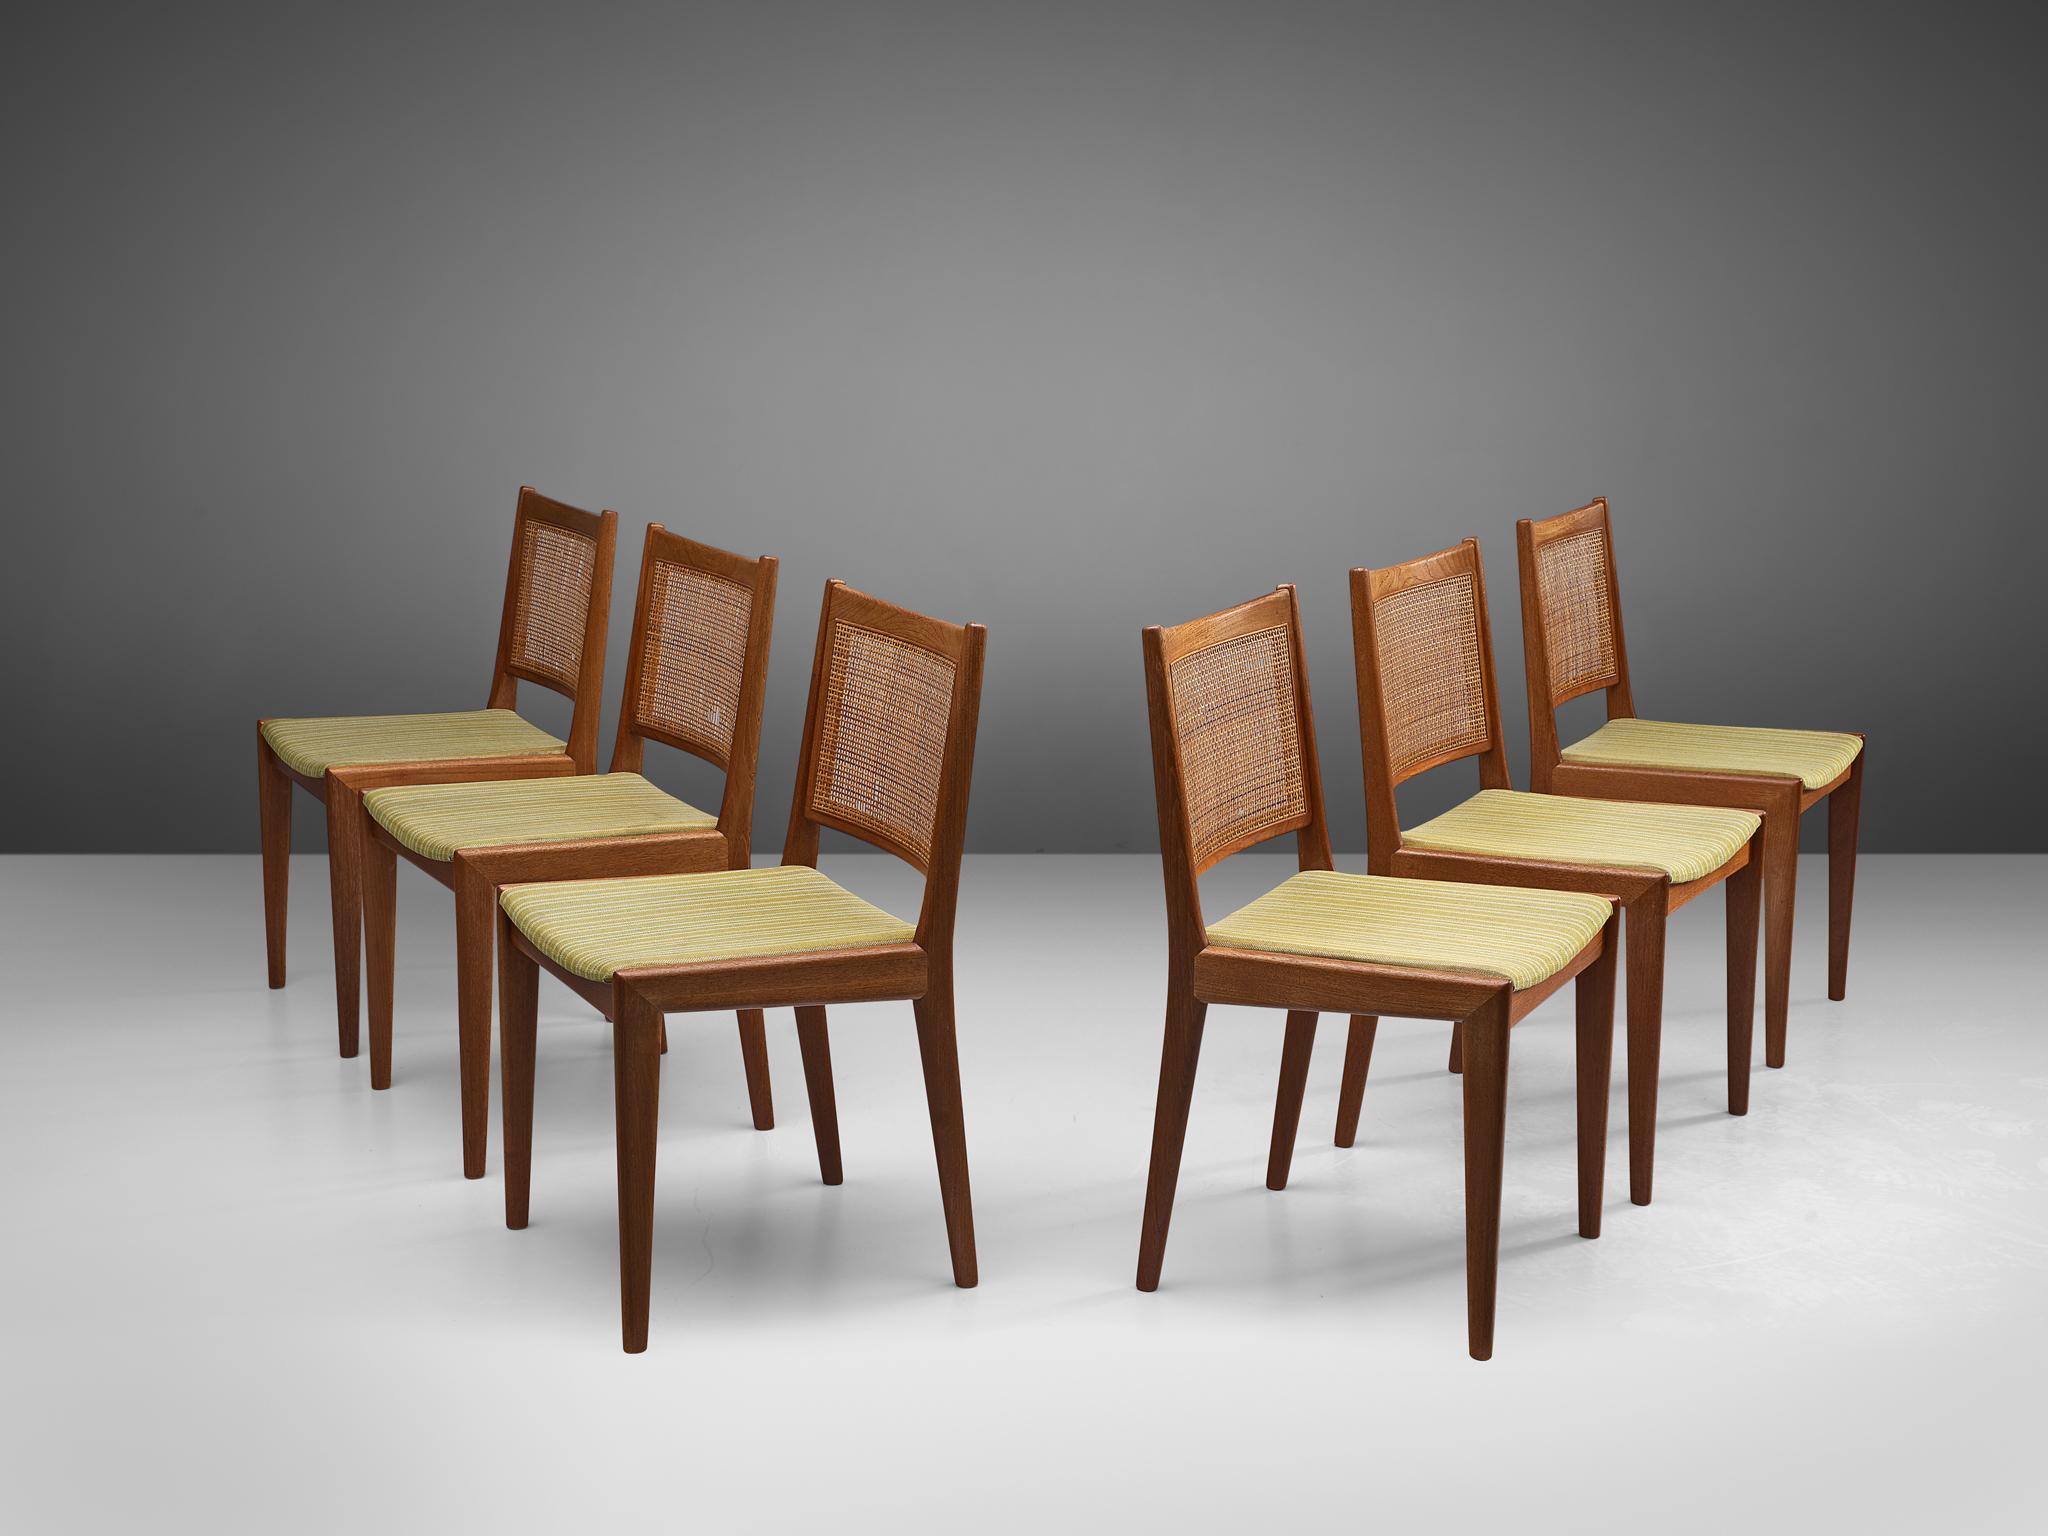 Karl-Erik Ekselius for J.O. Carlsson, set of 6 dining chairs, teak, cane , Denmark, 1950s

This stately set of six chairs with teak frame has a profiled back with woven cane and a green to white seat with striped upholstery. This set is designed by